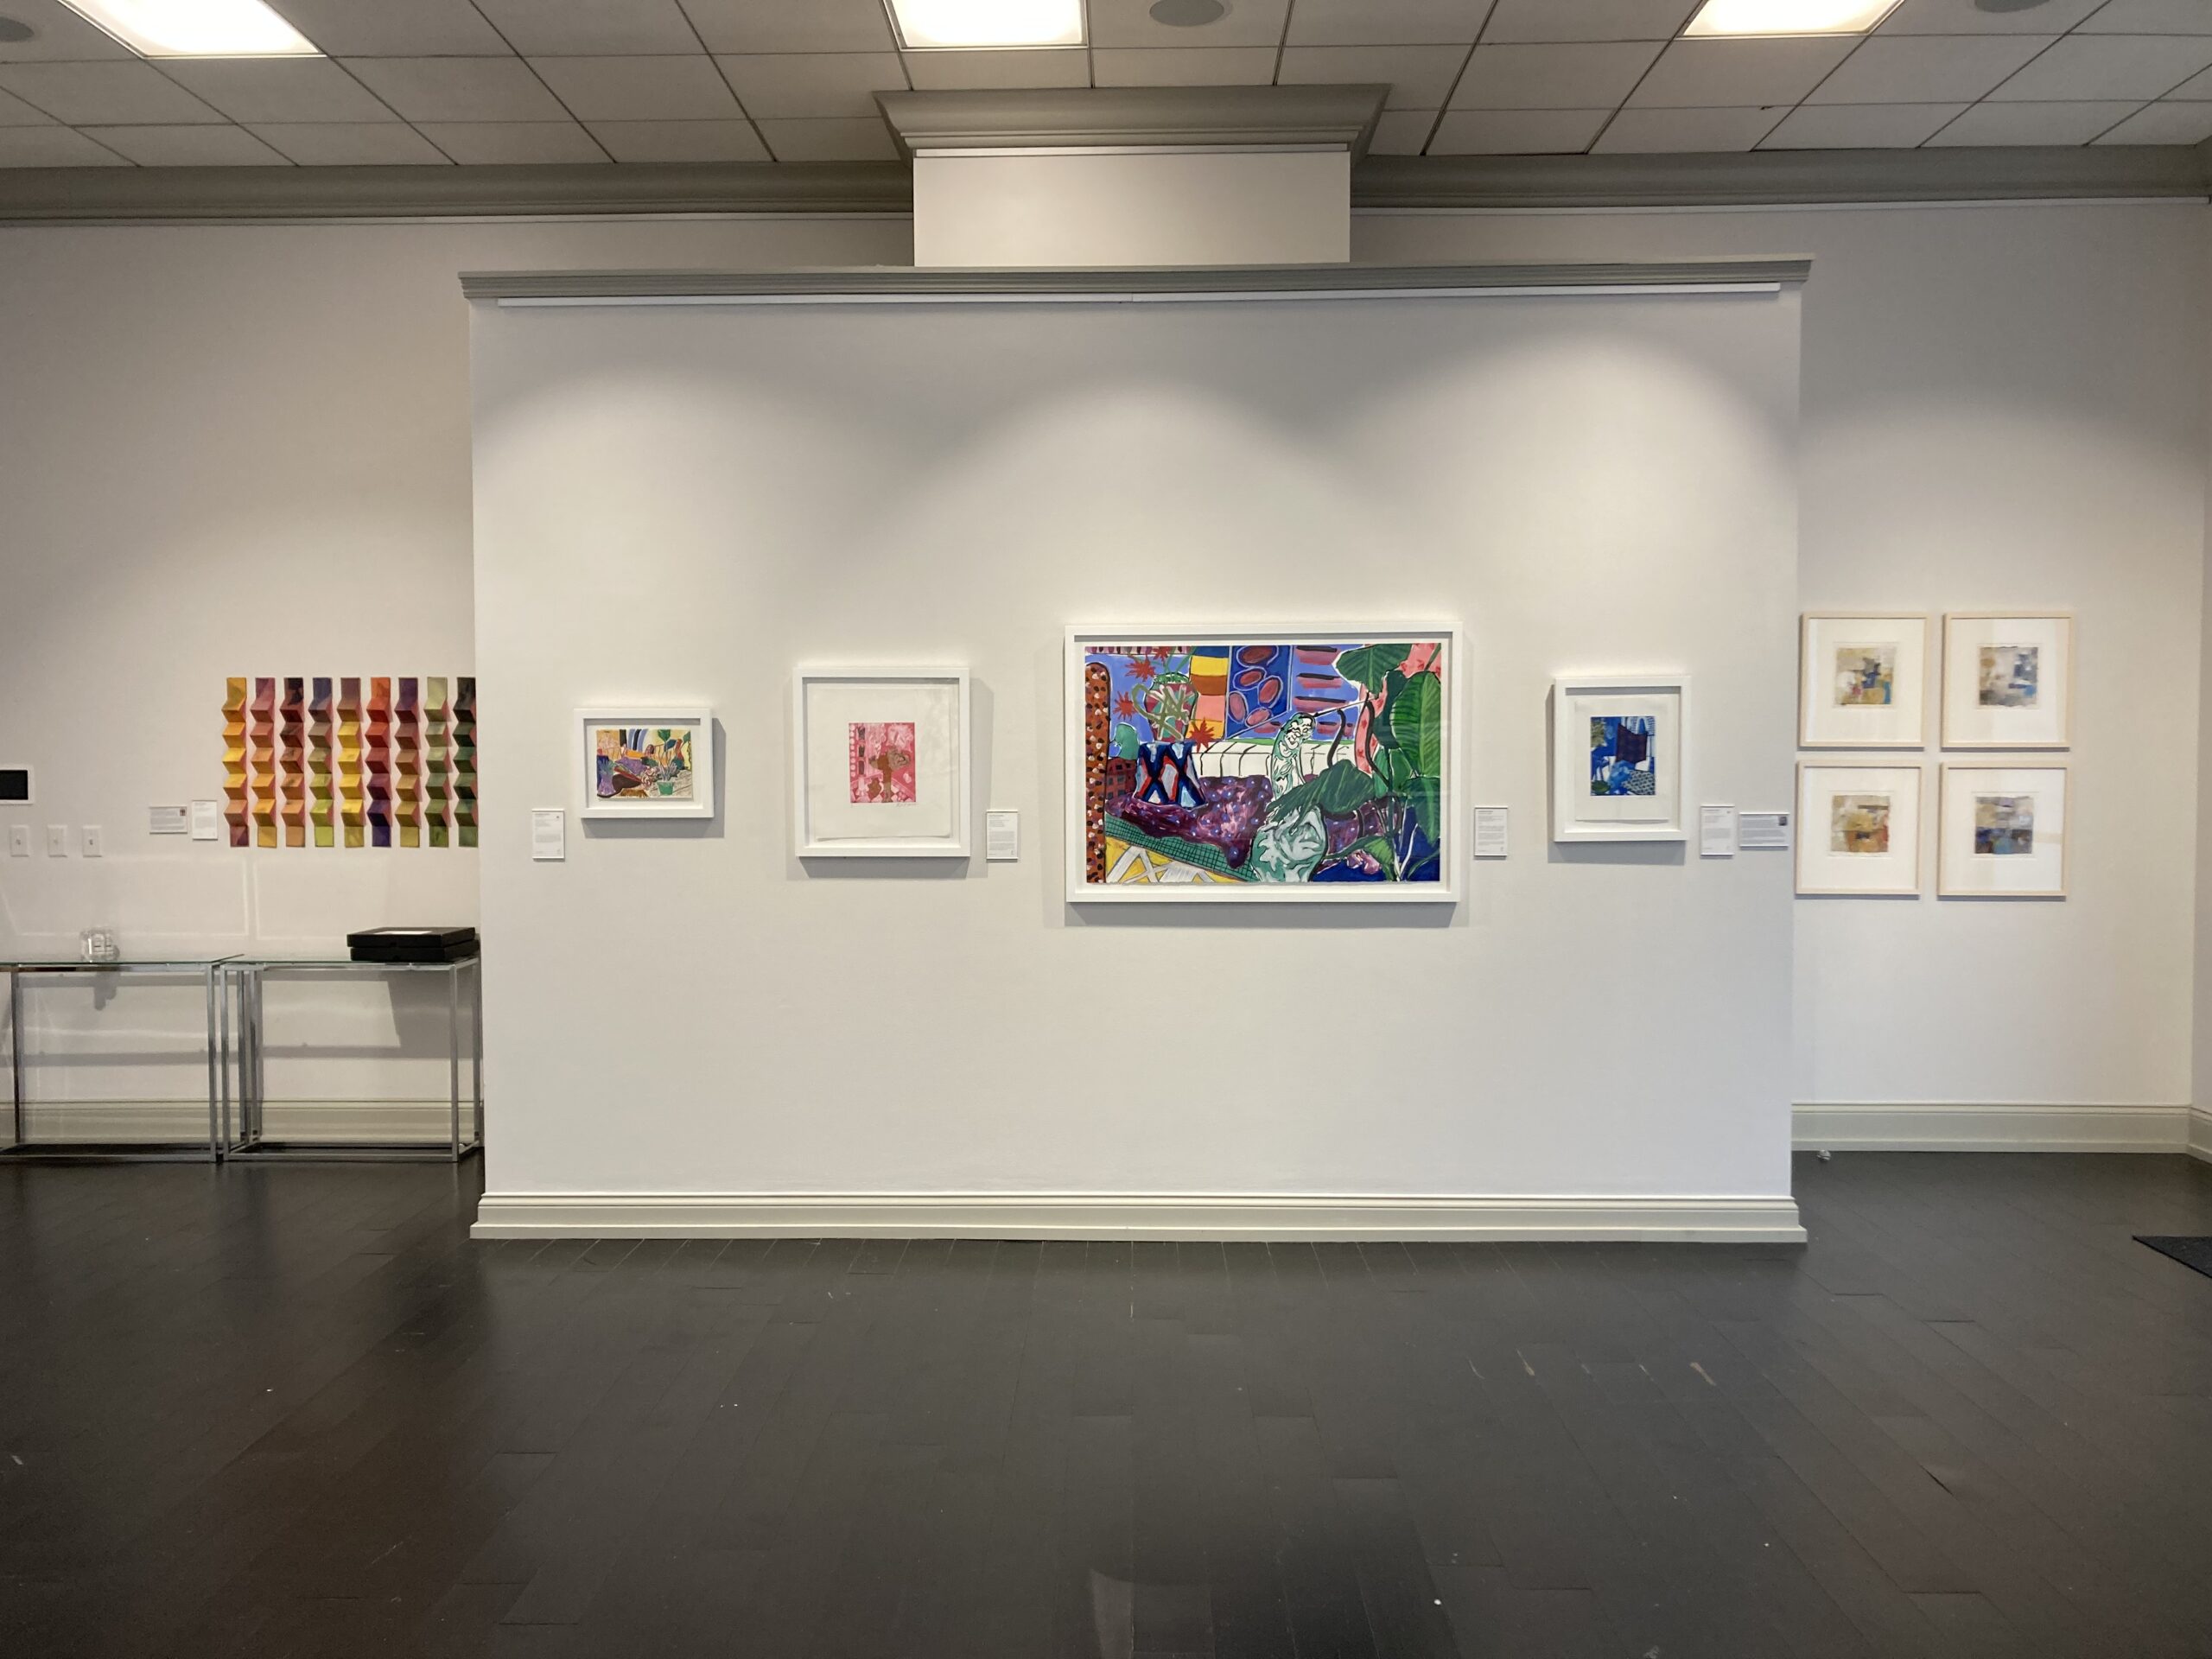 A gallery space featuring several colorful framed works of art hung on the walls.